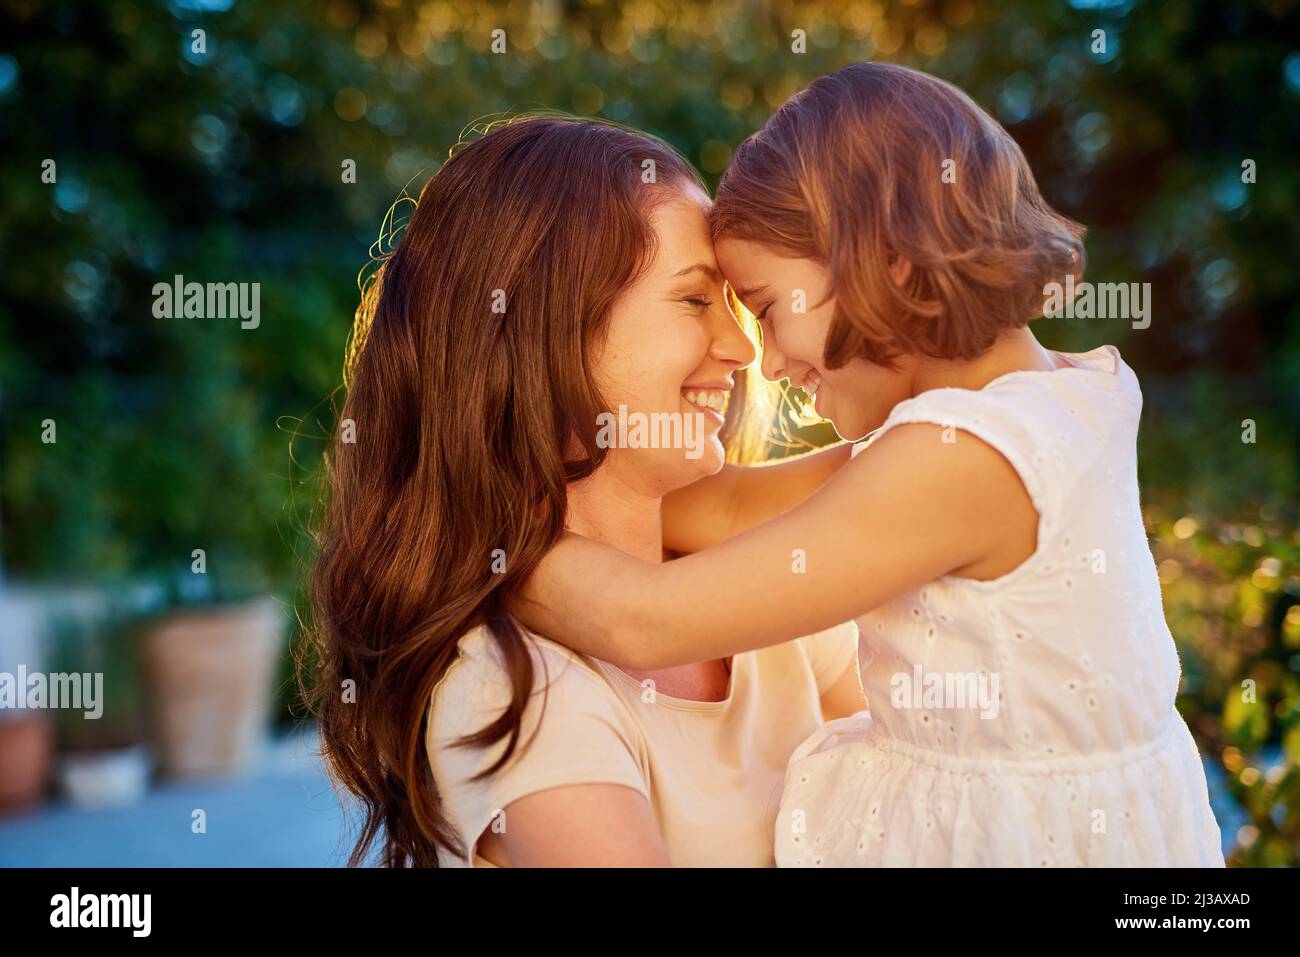 Seeing her smile makes me smile too. Cropped shot of a mother and daughter spending quality time together. Stock Photo